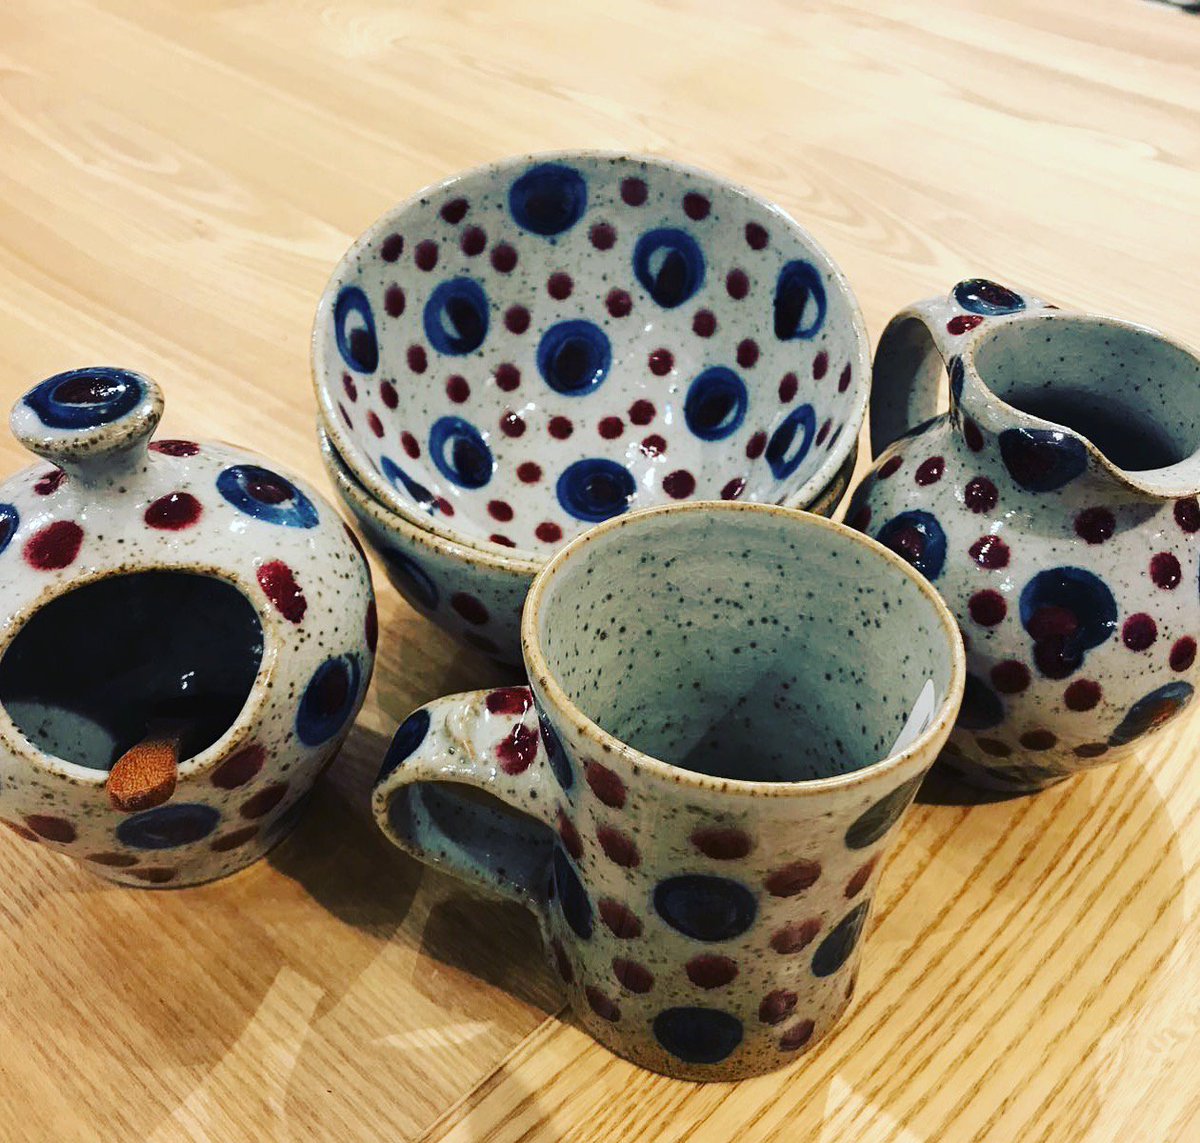 JUST ARRIVED....
Stunning hand thrown pottery in an array of striking patterns and colours. Prices starting at £9.95 #britishdesign #britishceramics #britishpottery #britishcraft